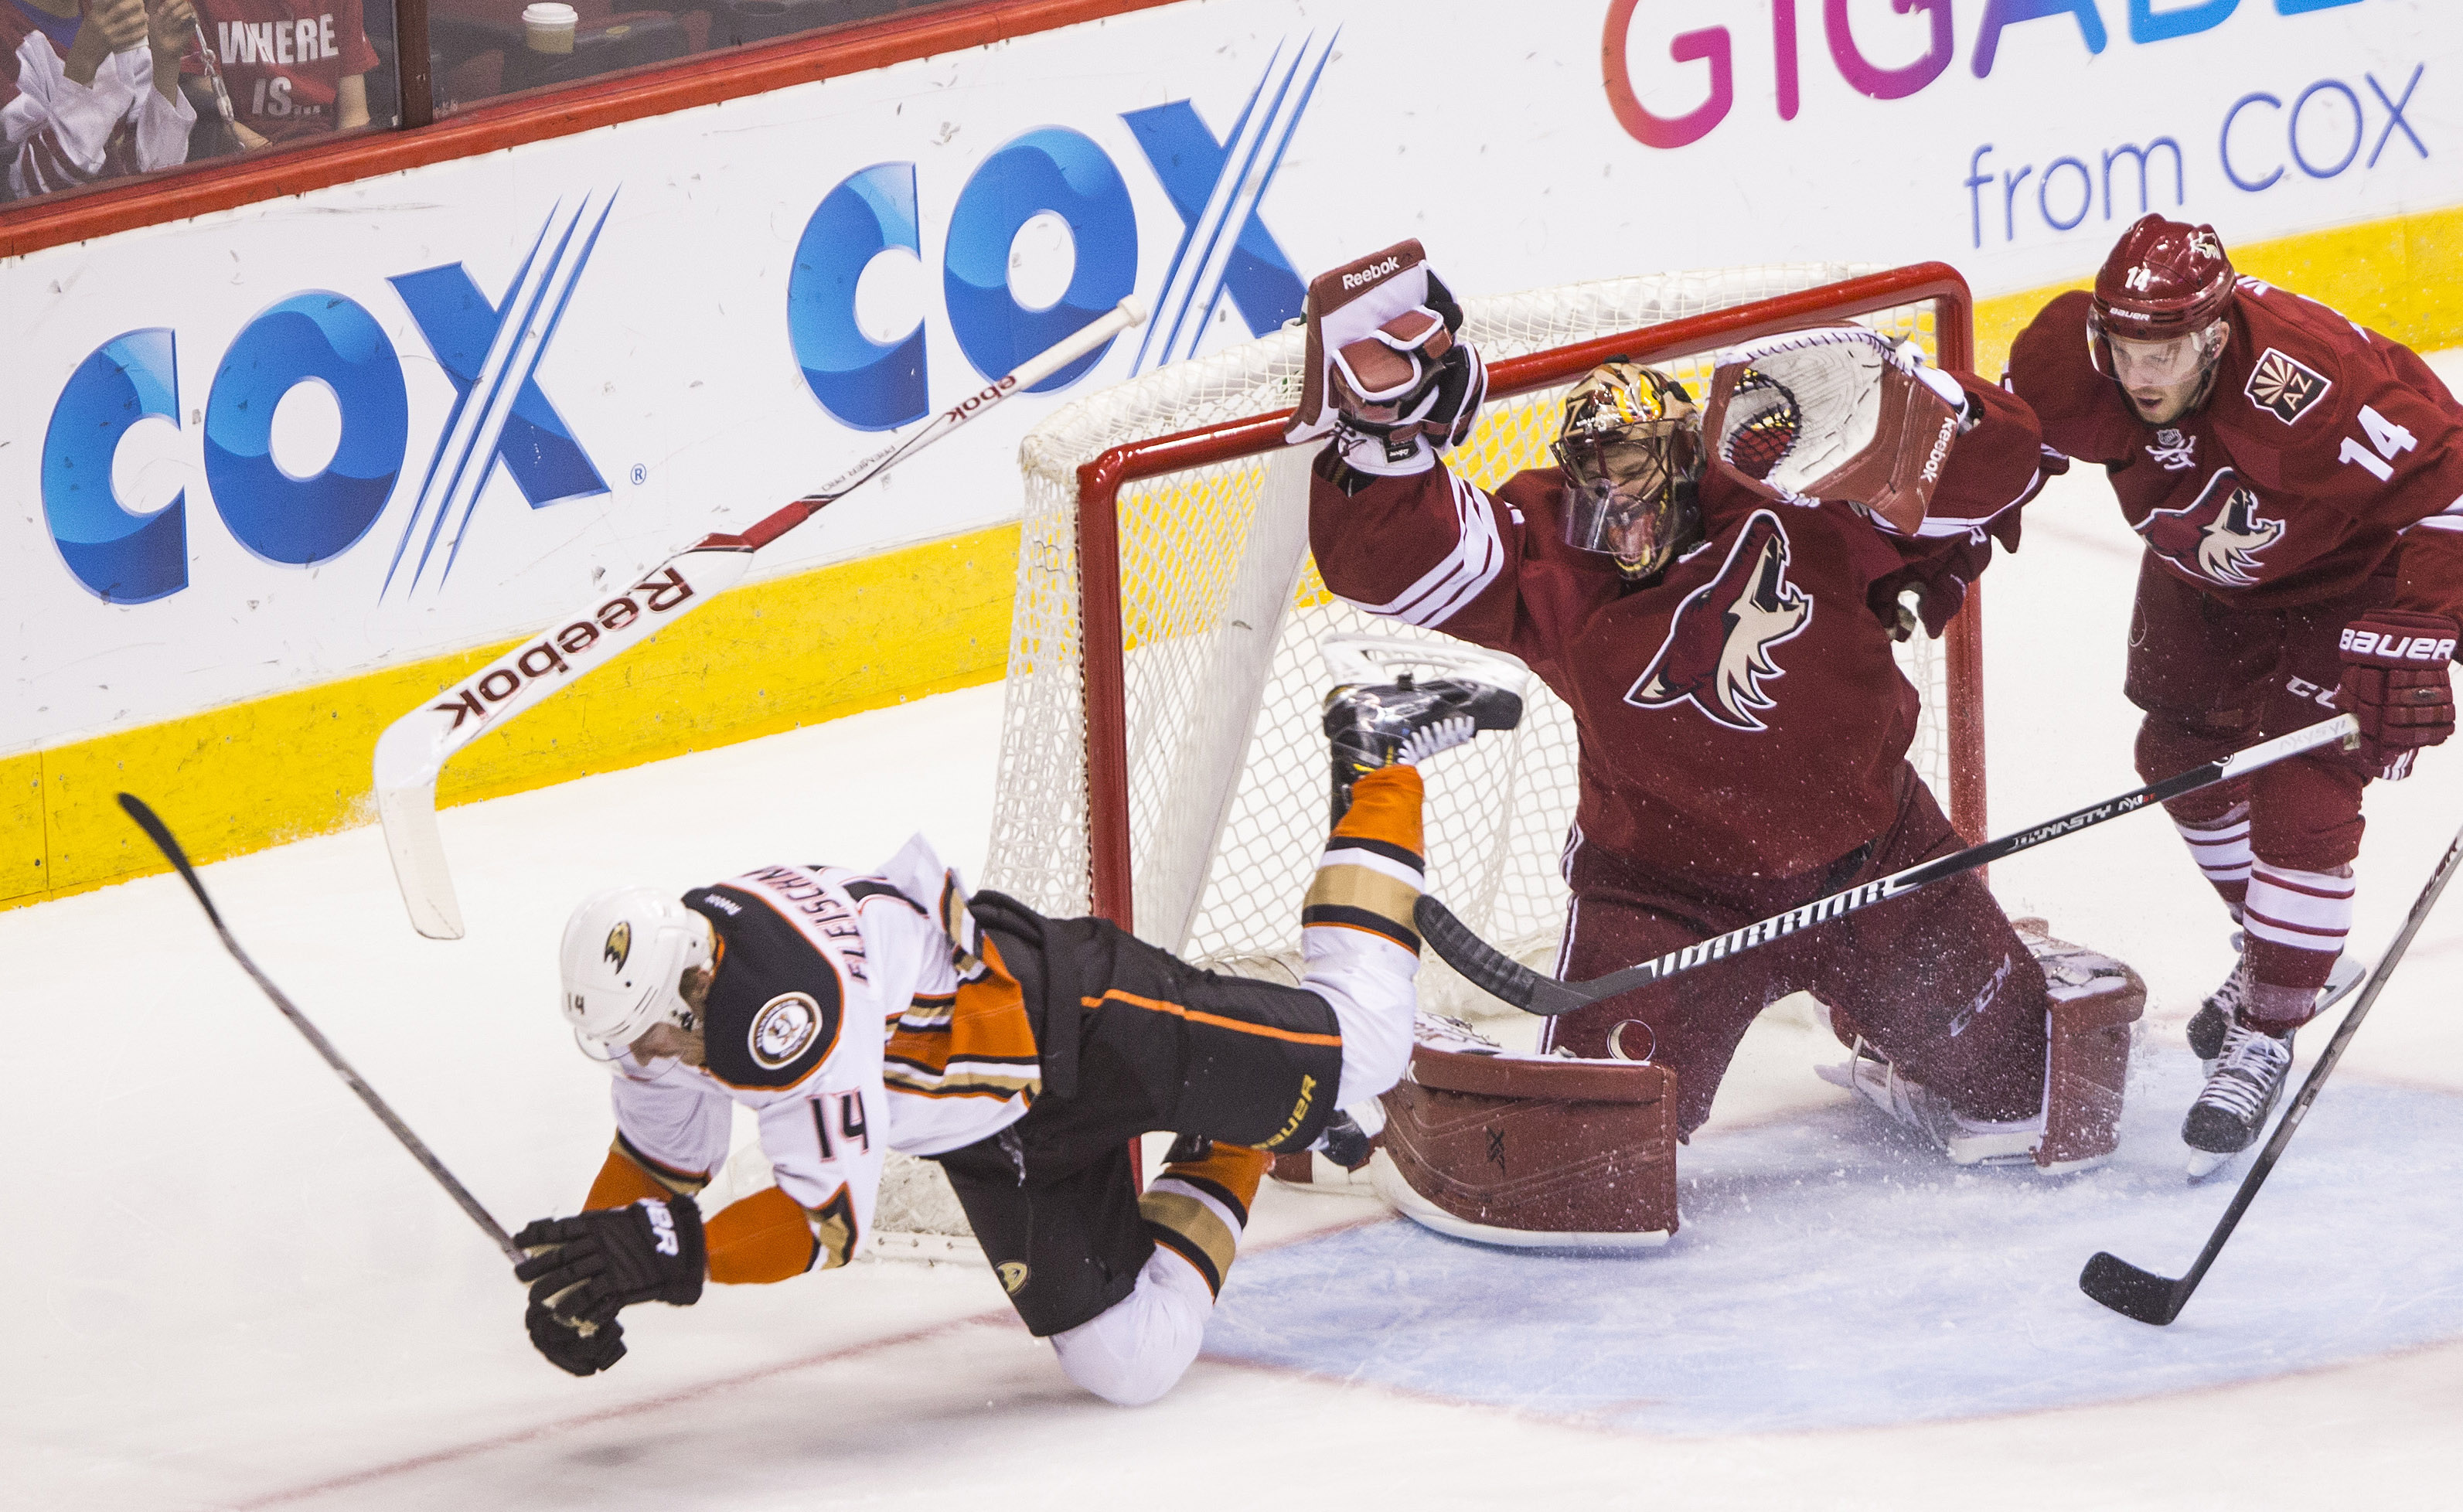 Amid an icy divorce with Glendale, the Arizona Coyotes future is